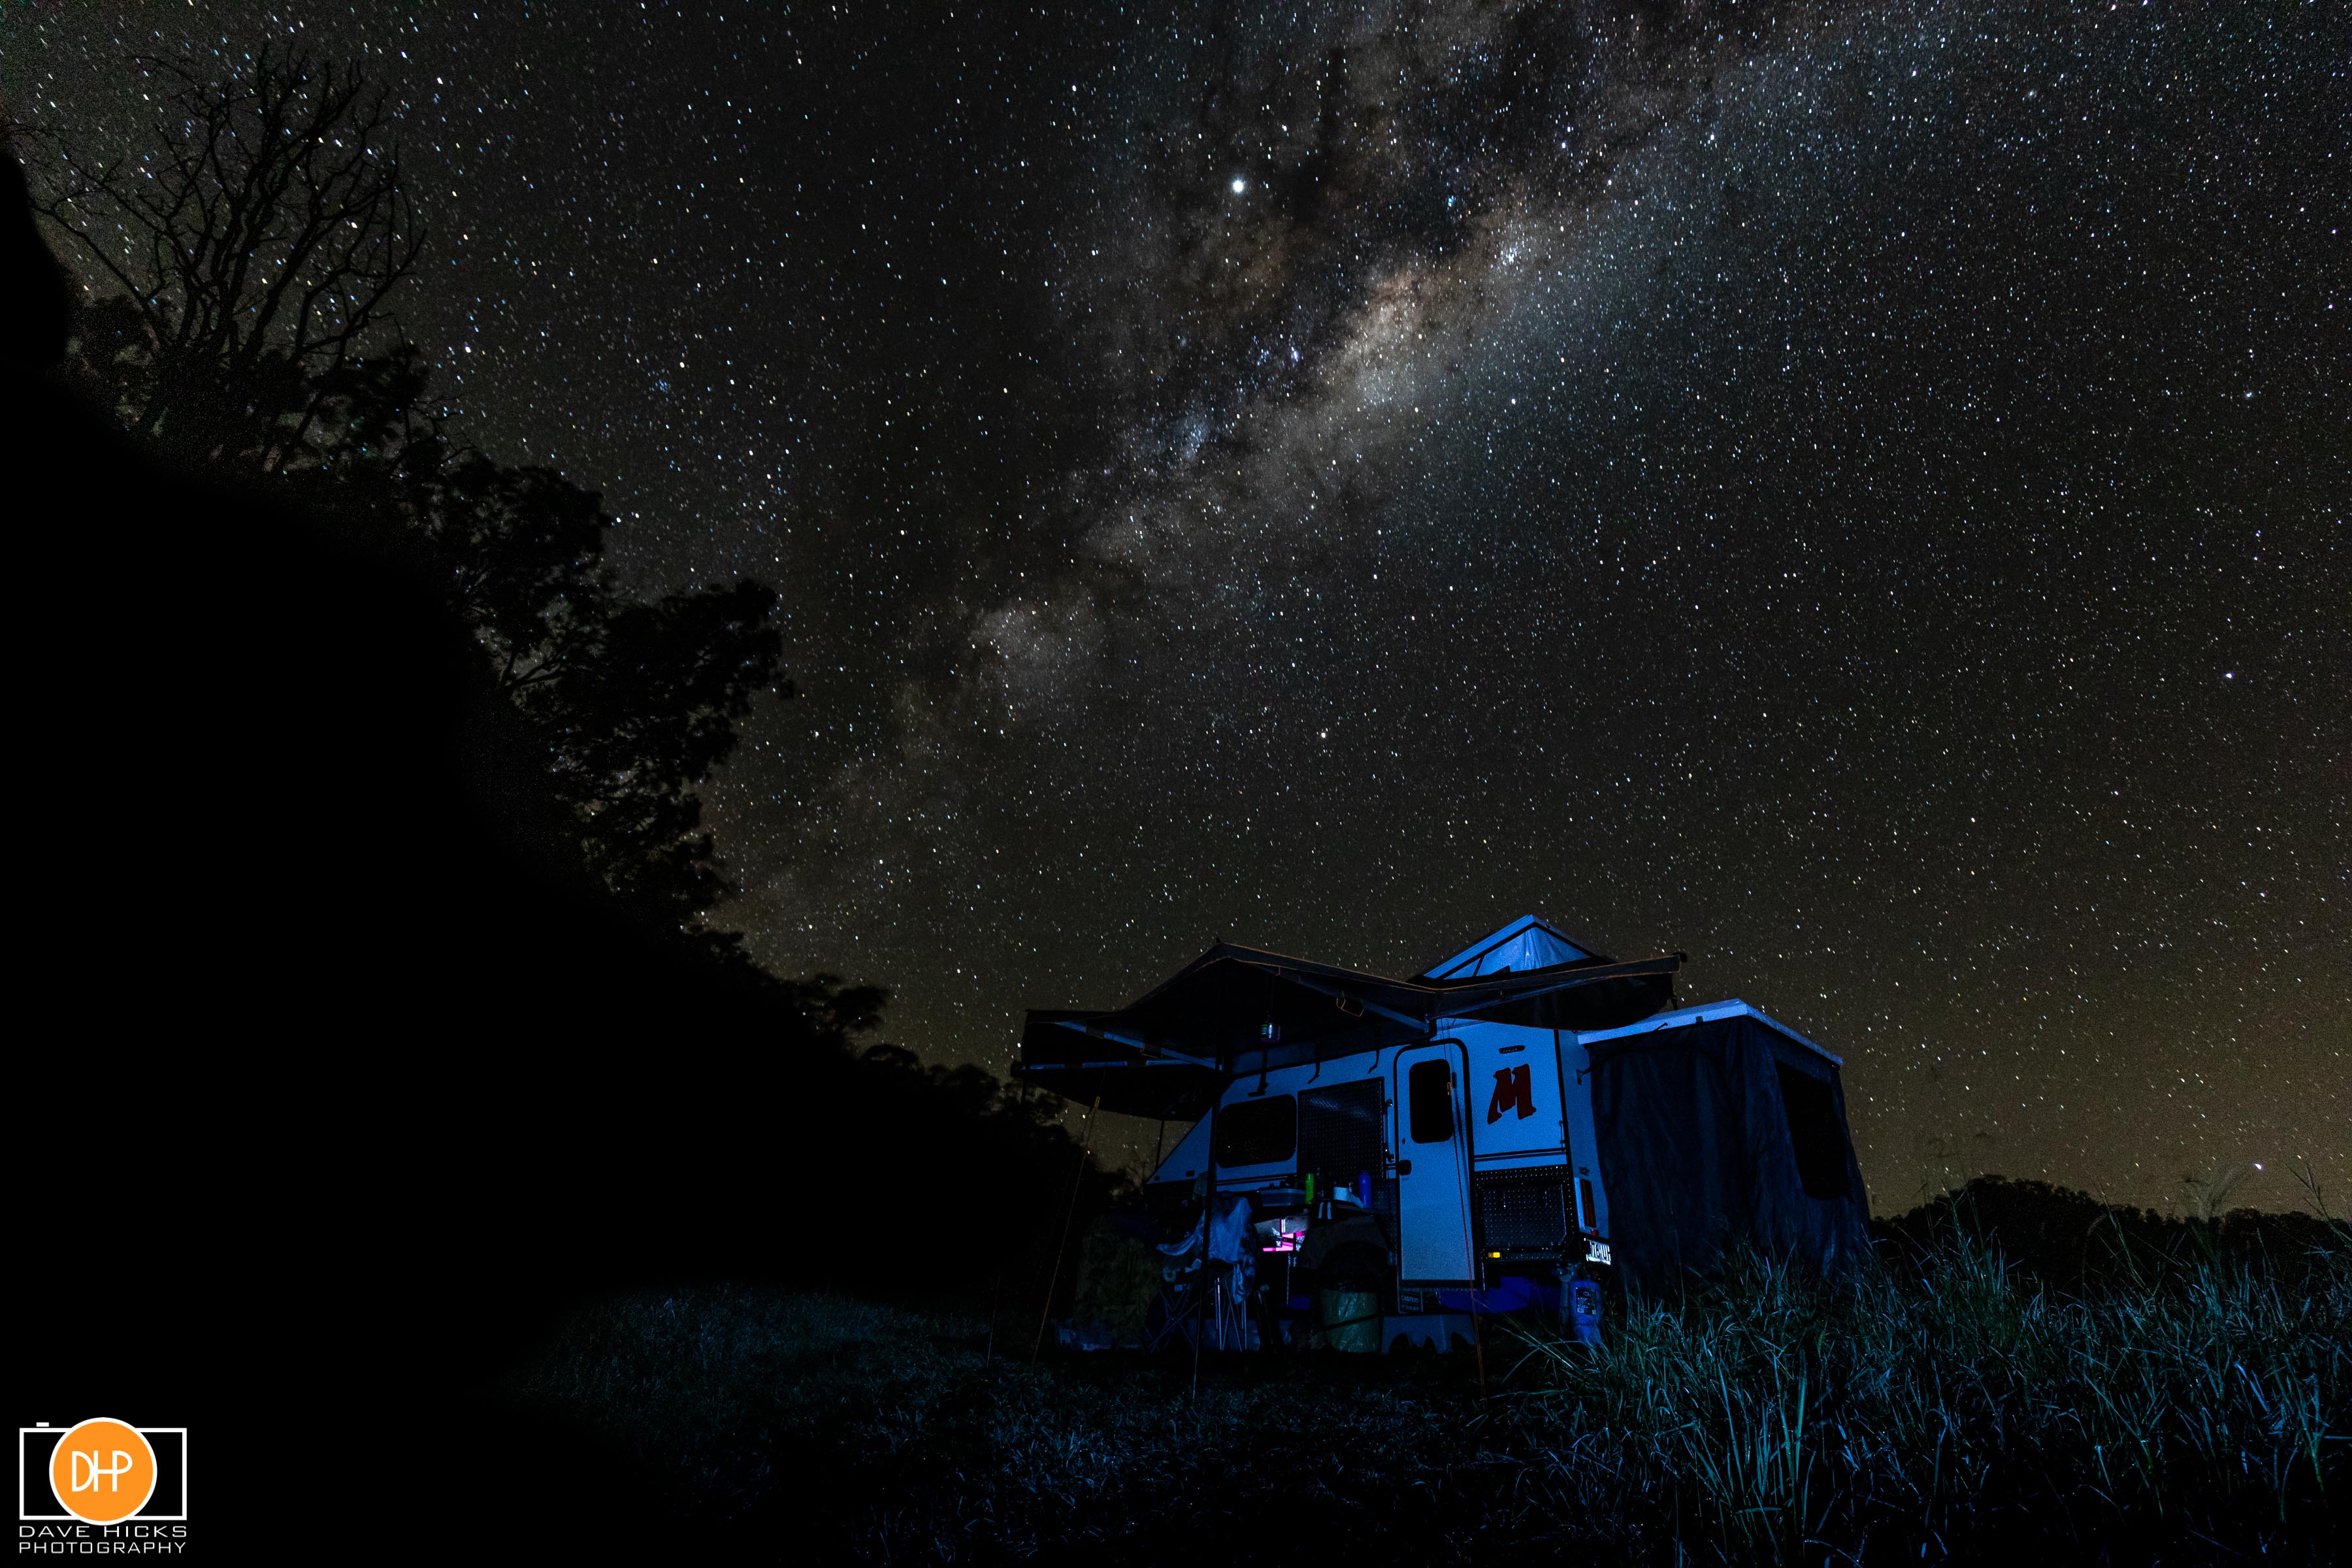 Modcon RV off road hybrid camper trailers C3 under a starry sky